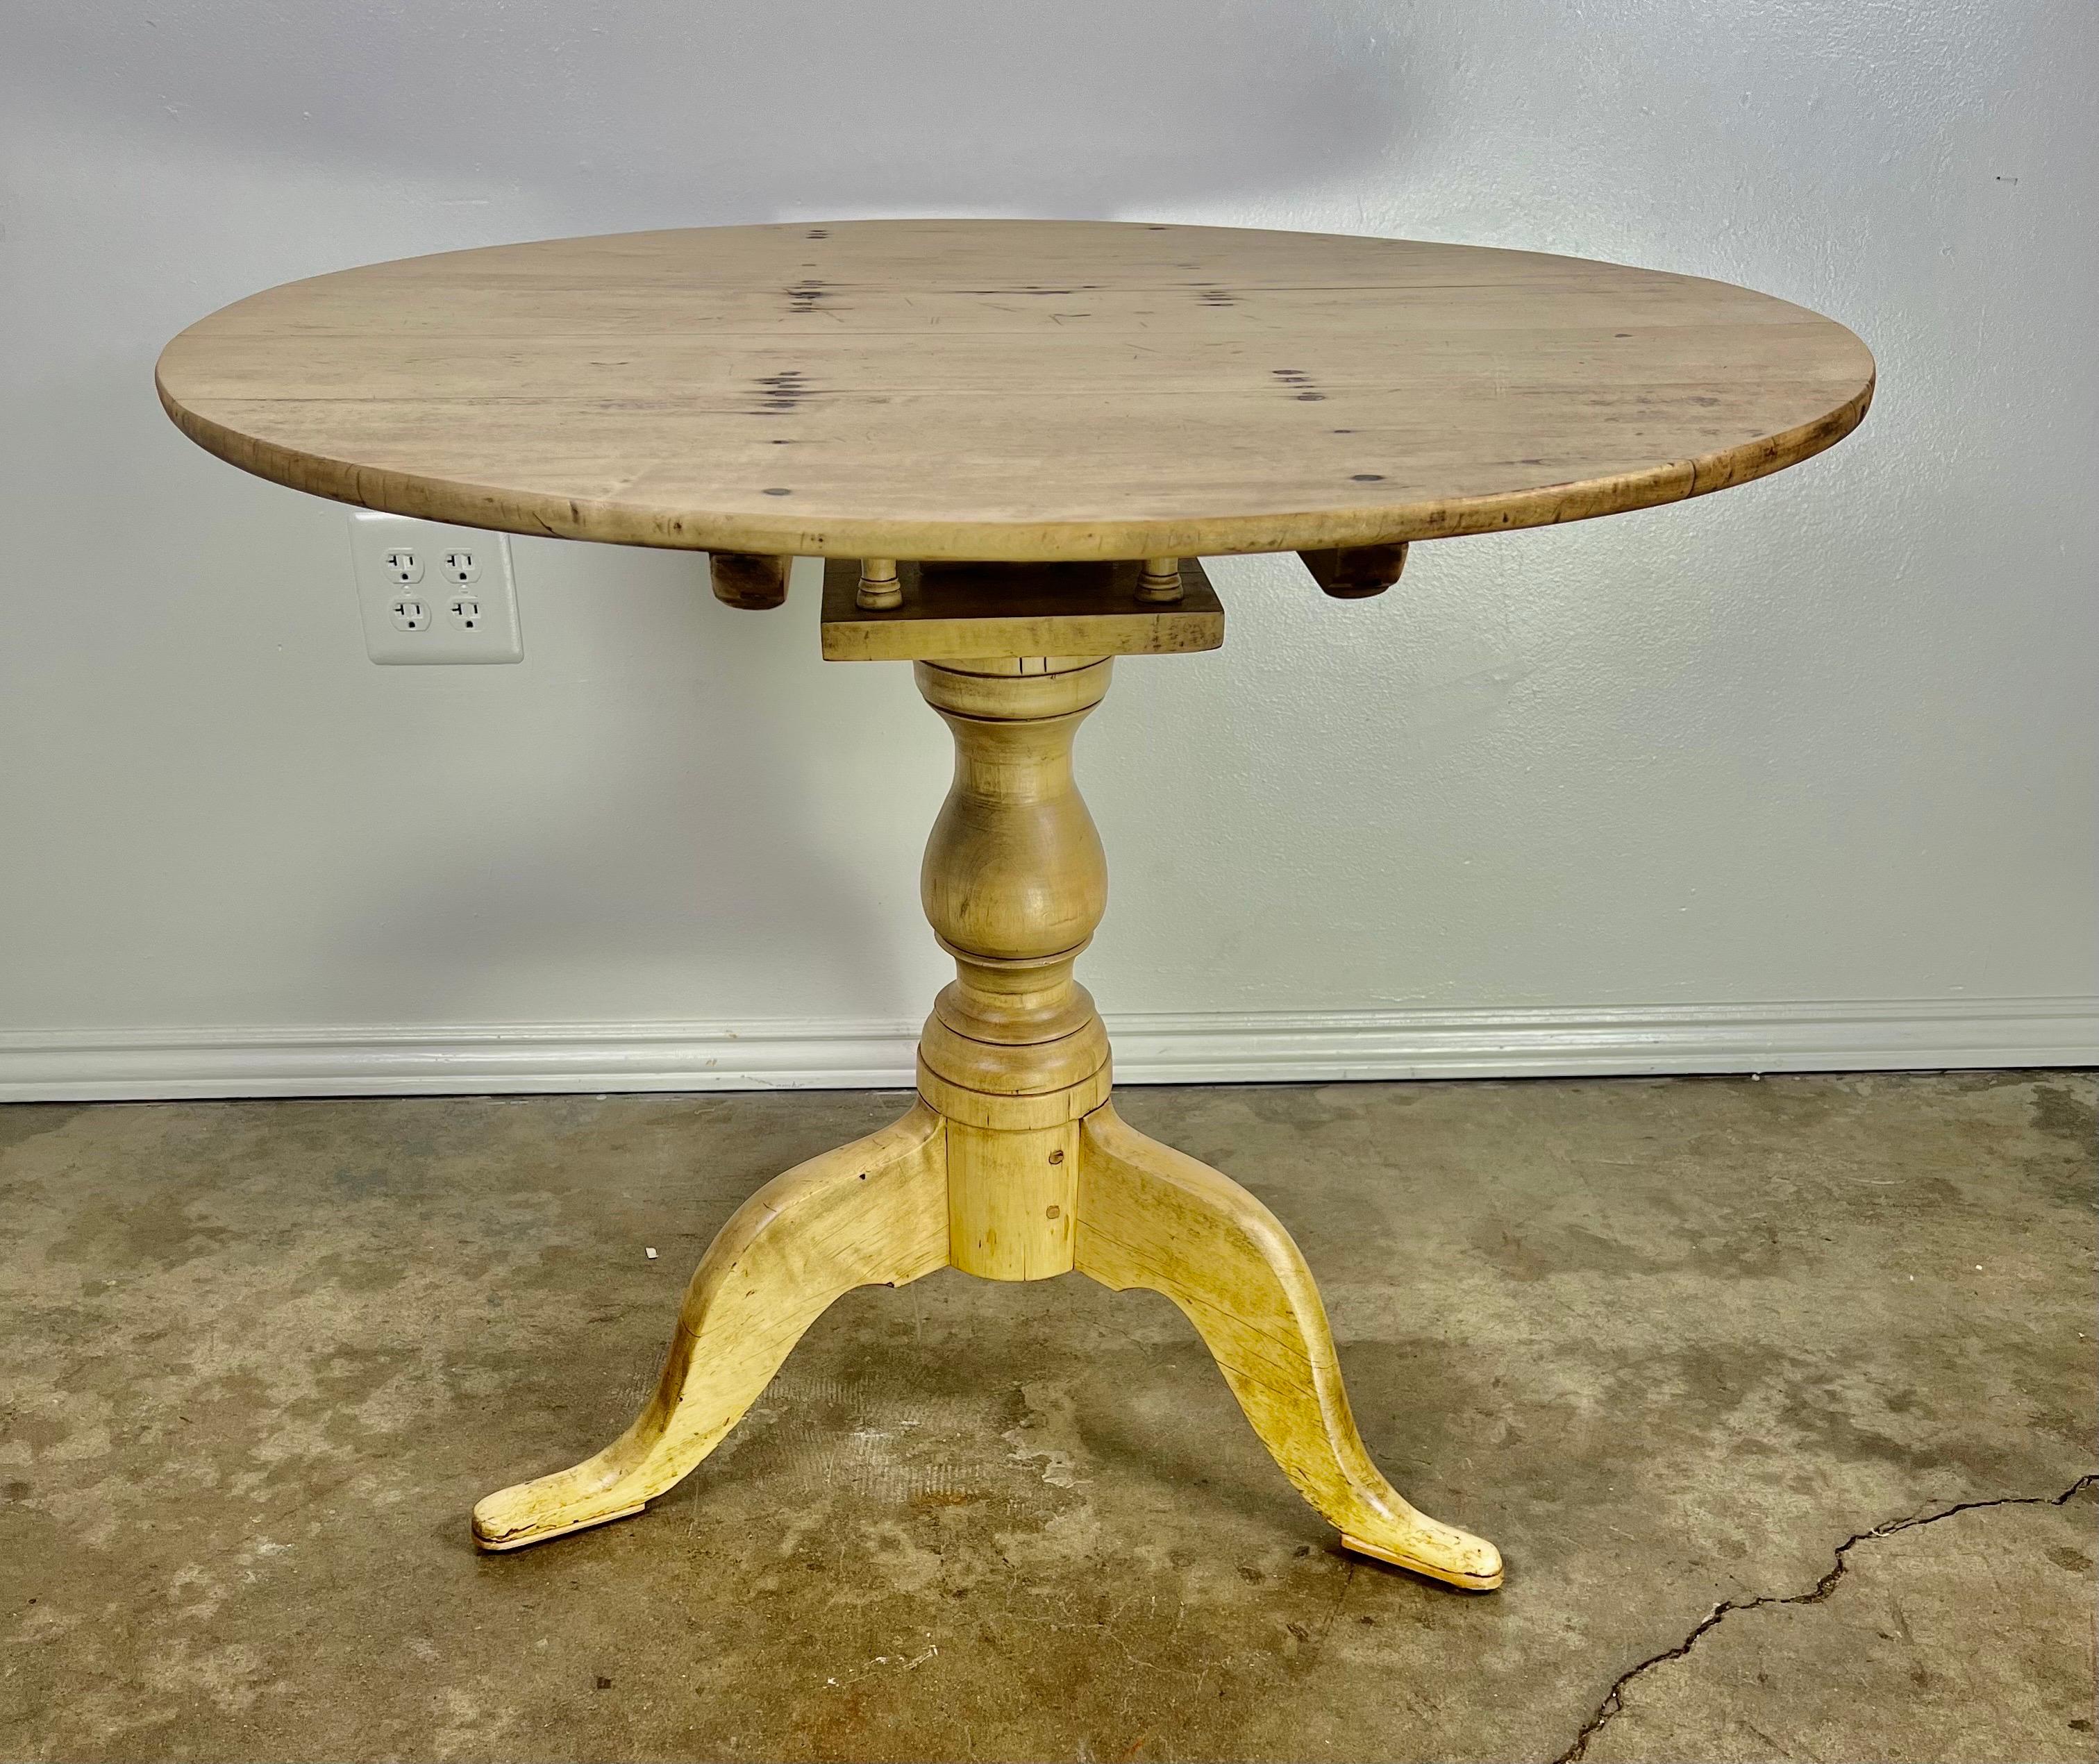 19th century maple tripod table. A round top sits on a tripod base with the original tilting mechanism. The table does not tilt at this point, but the detail is great. The table is sturdy and in good working condition. The wear is consistent with